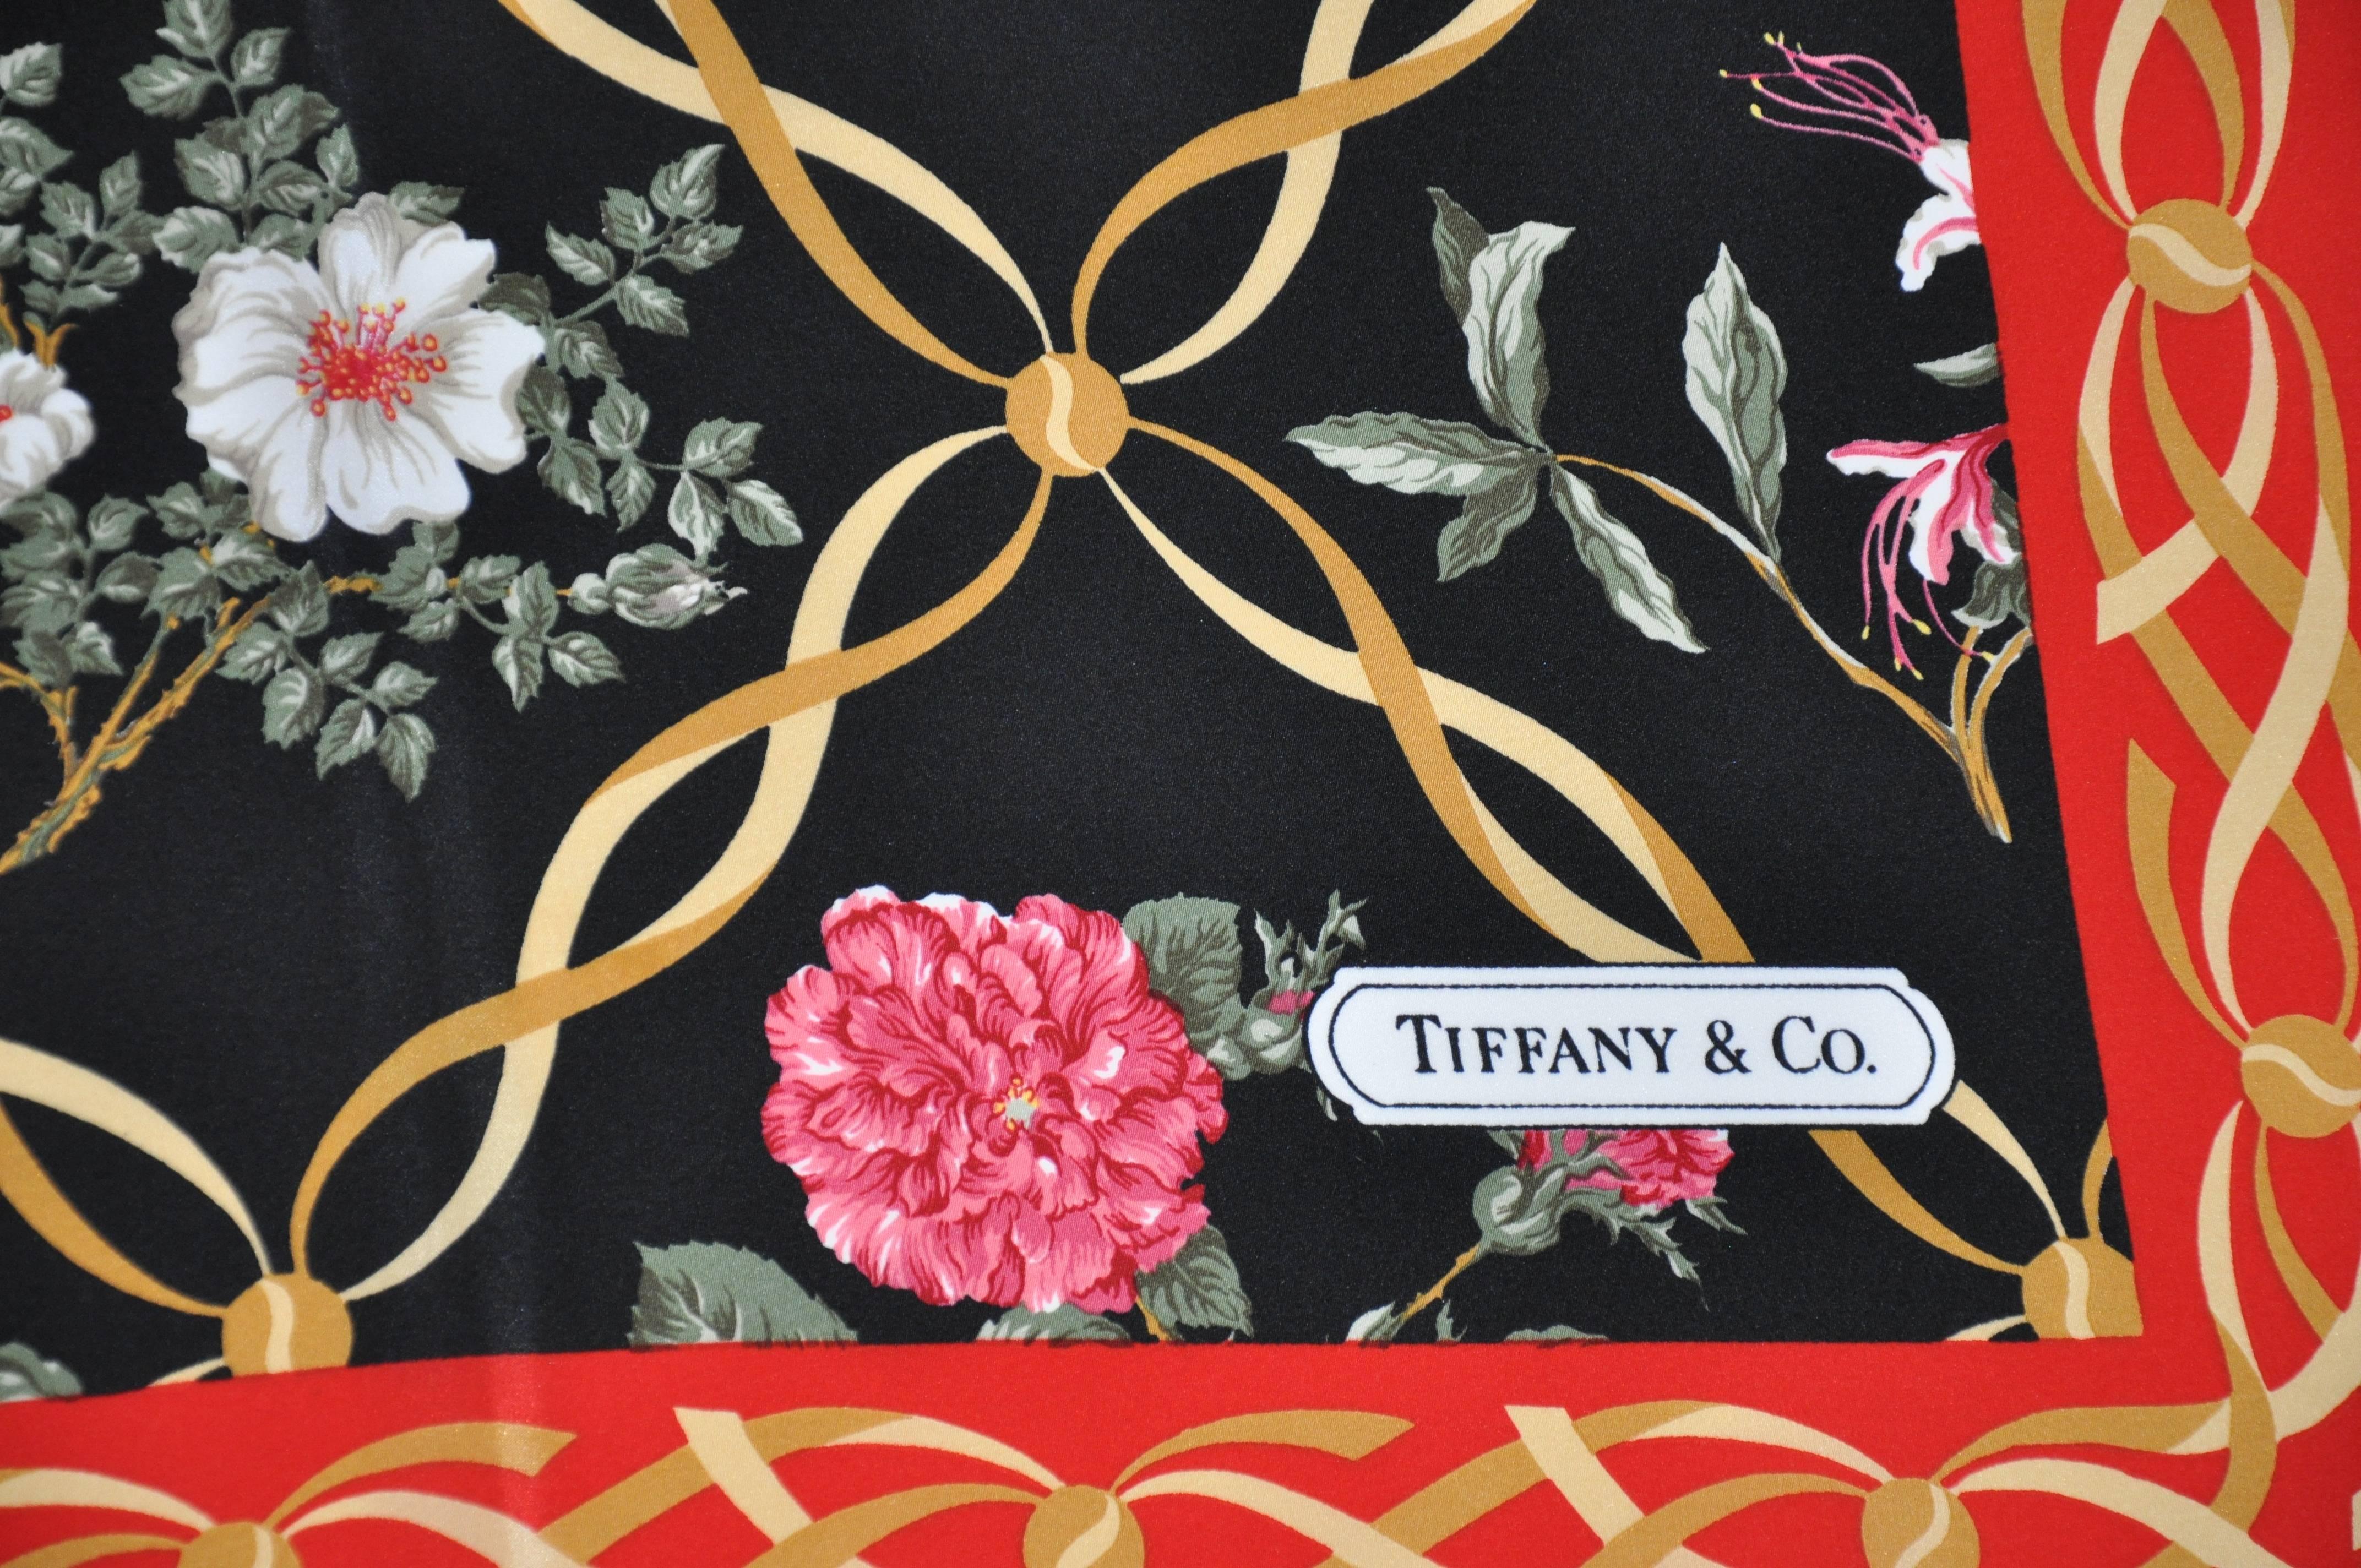    Tiffany & Co wonderfully multi-color festive floral silk scarf, designed by Sybill Connolly, measures 35 inches by 35 inches accented with hand-rolled edges. Made in Itay.